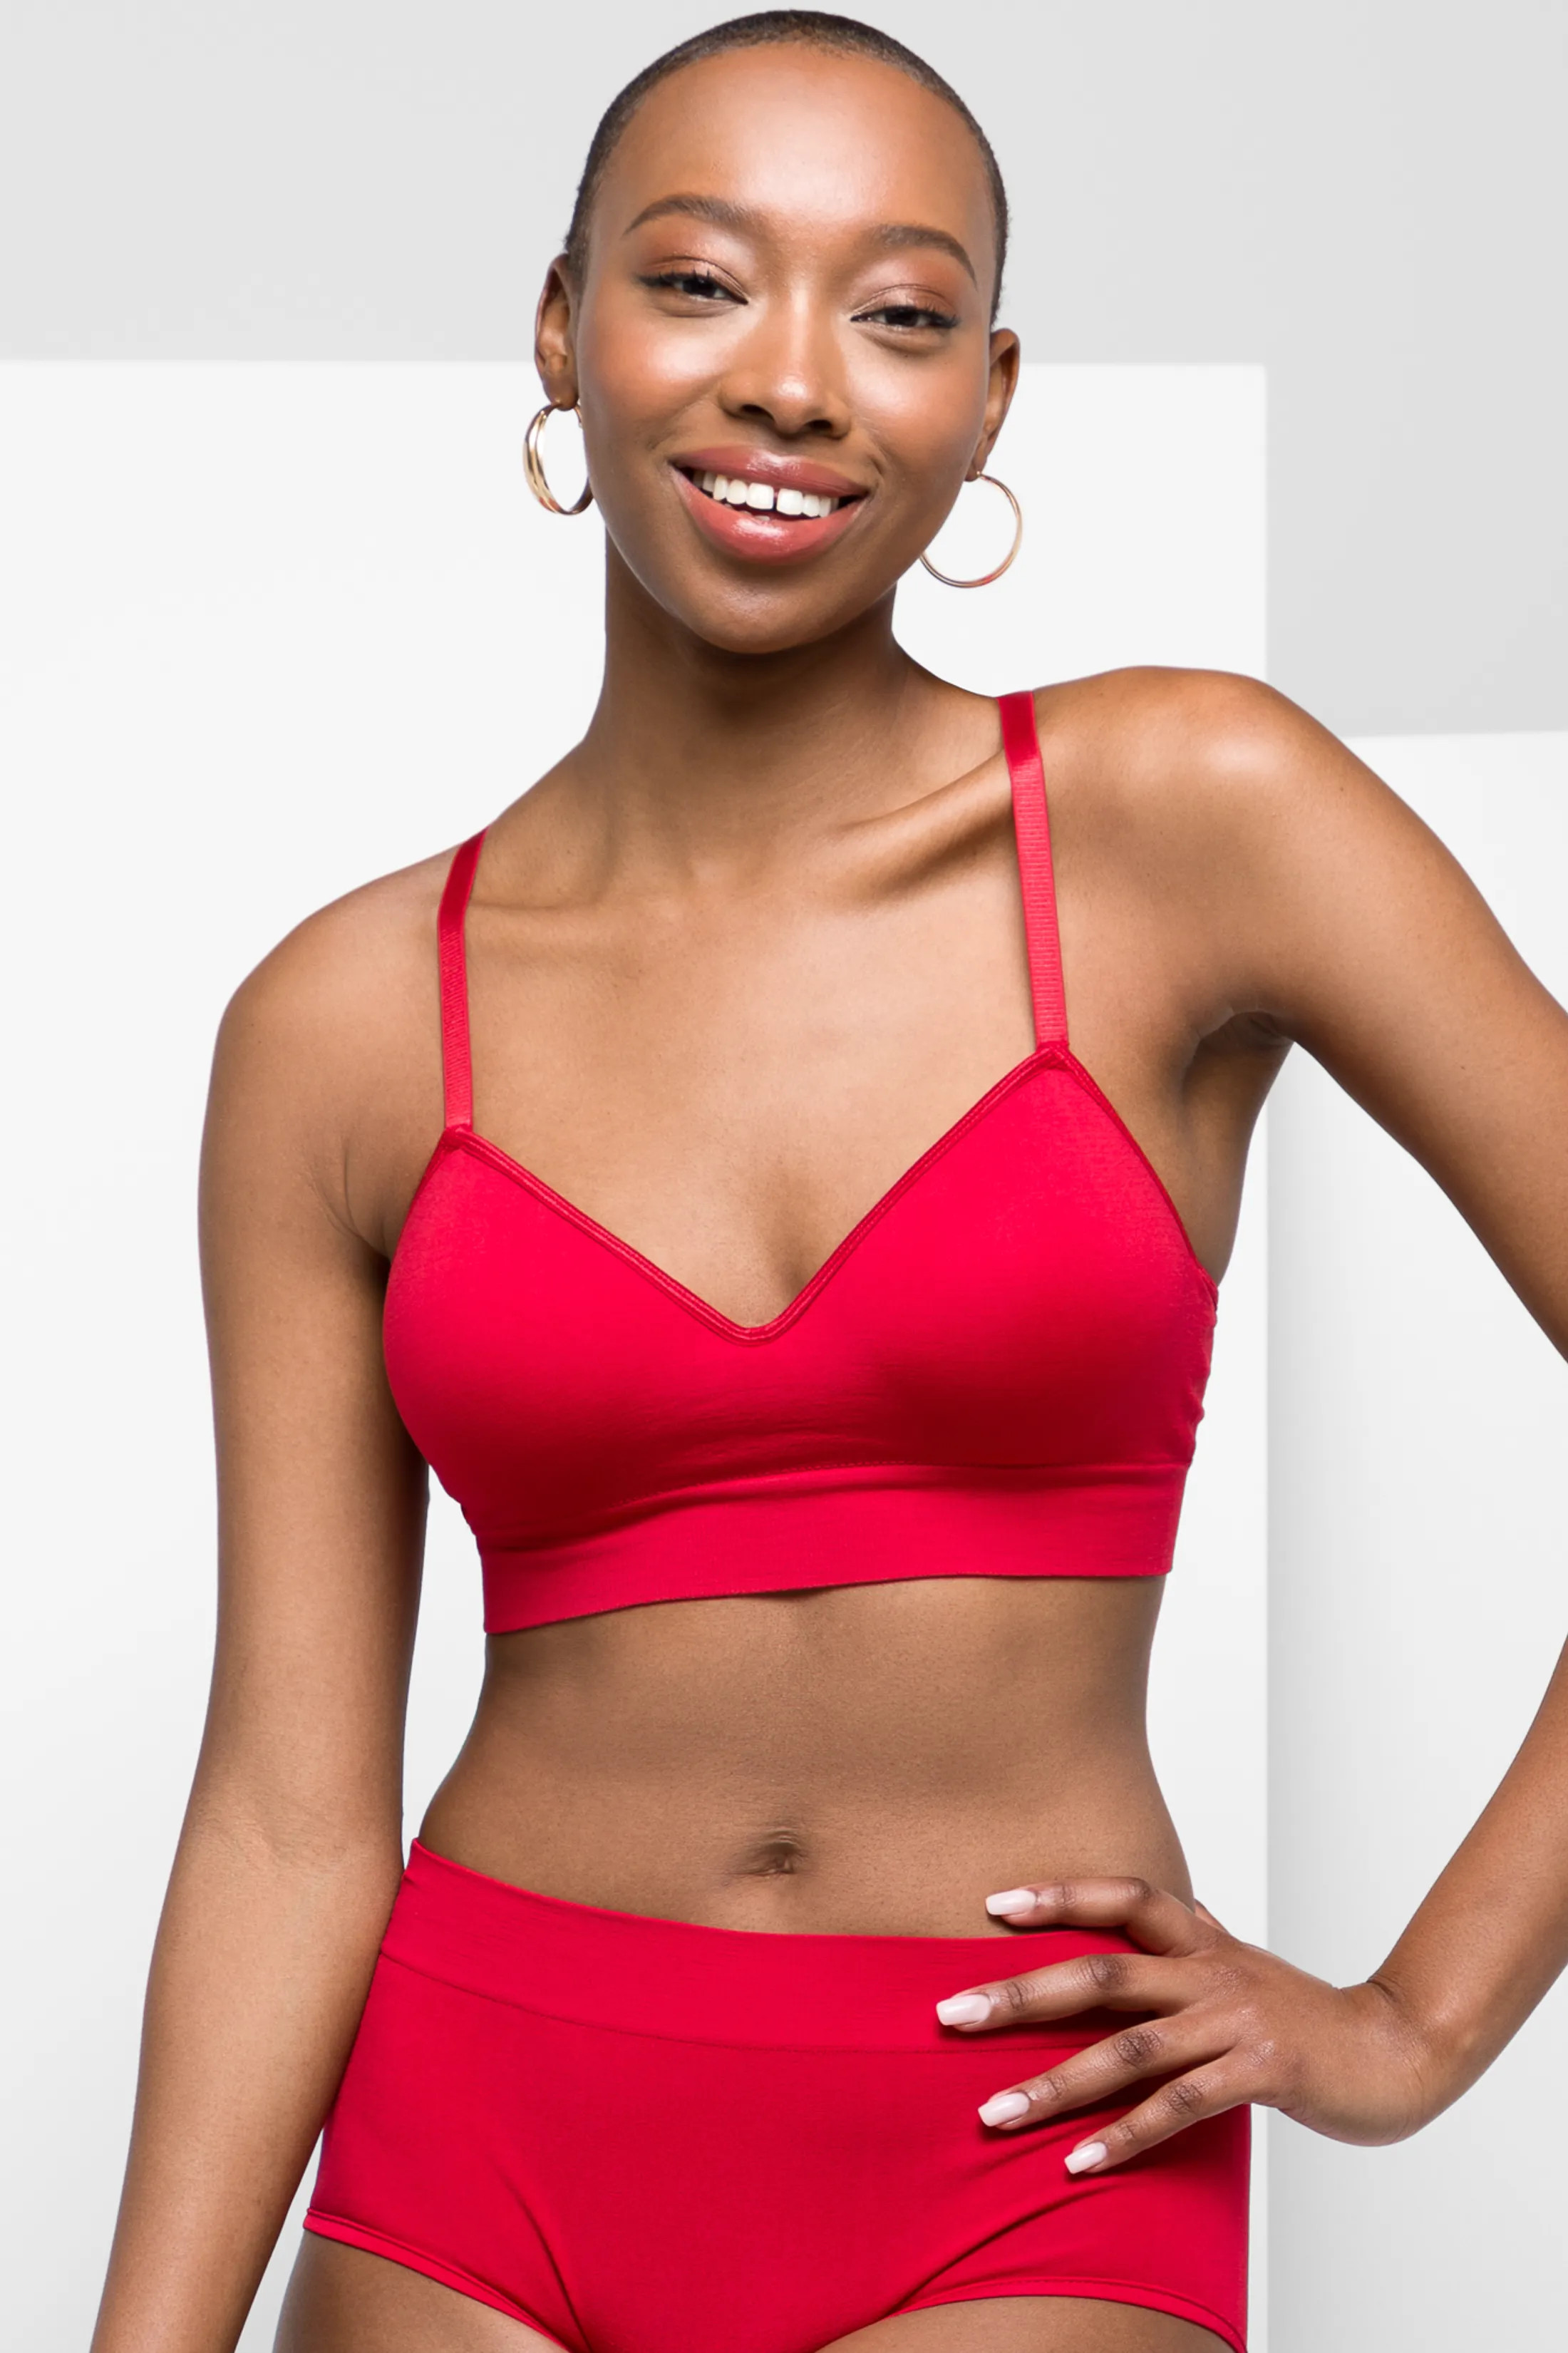 Women's fashion - Buy clothing, shoes & lingerie online at Ackermans